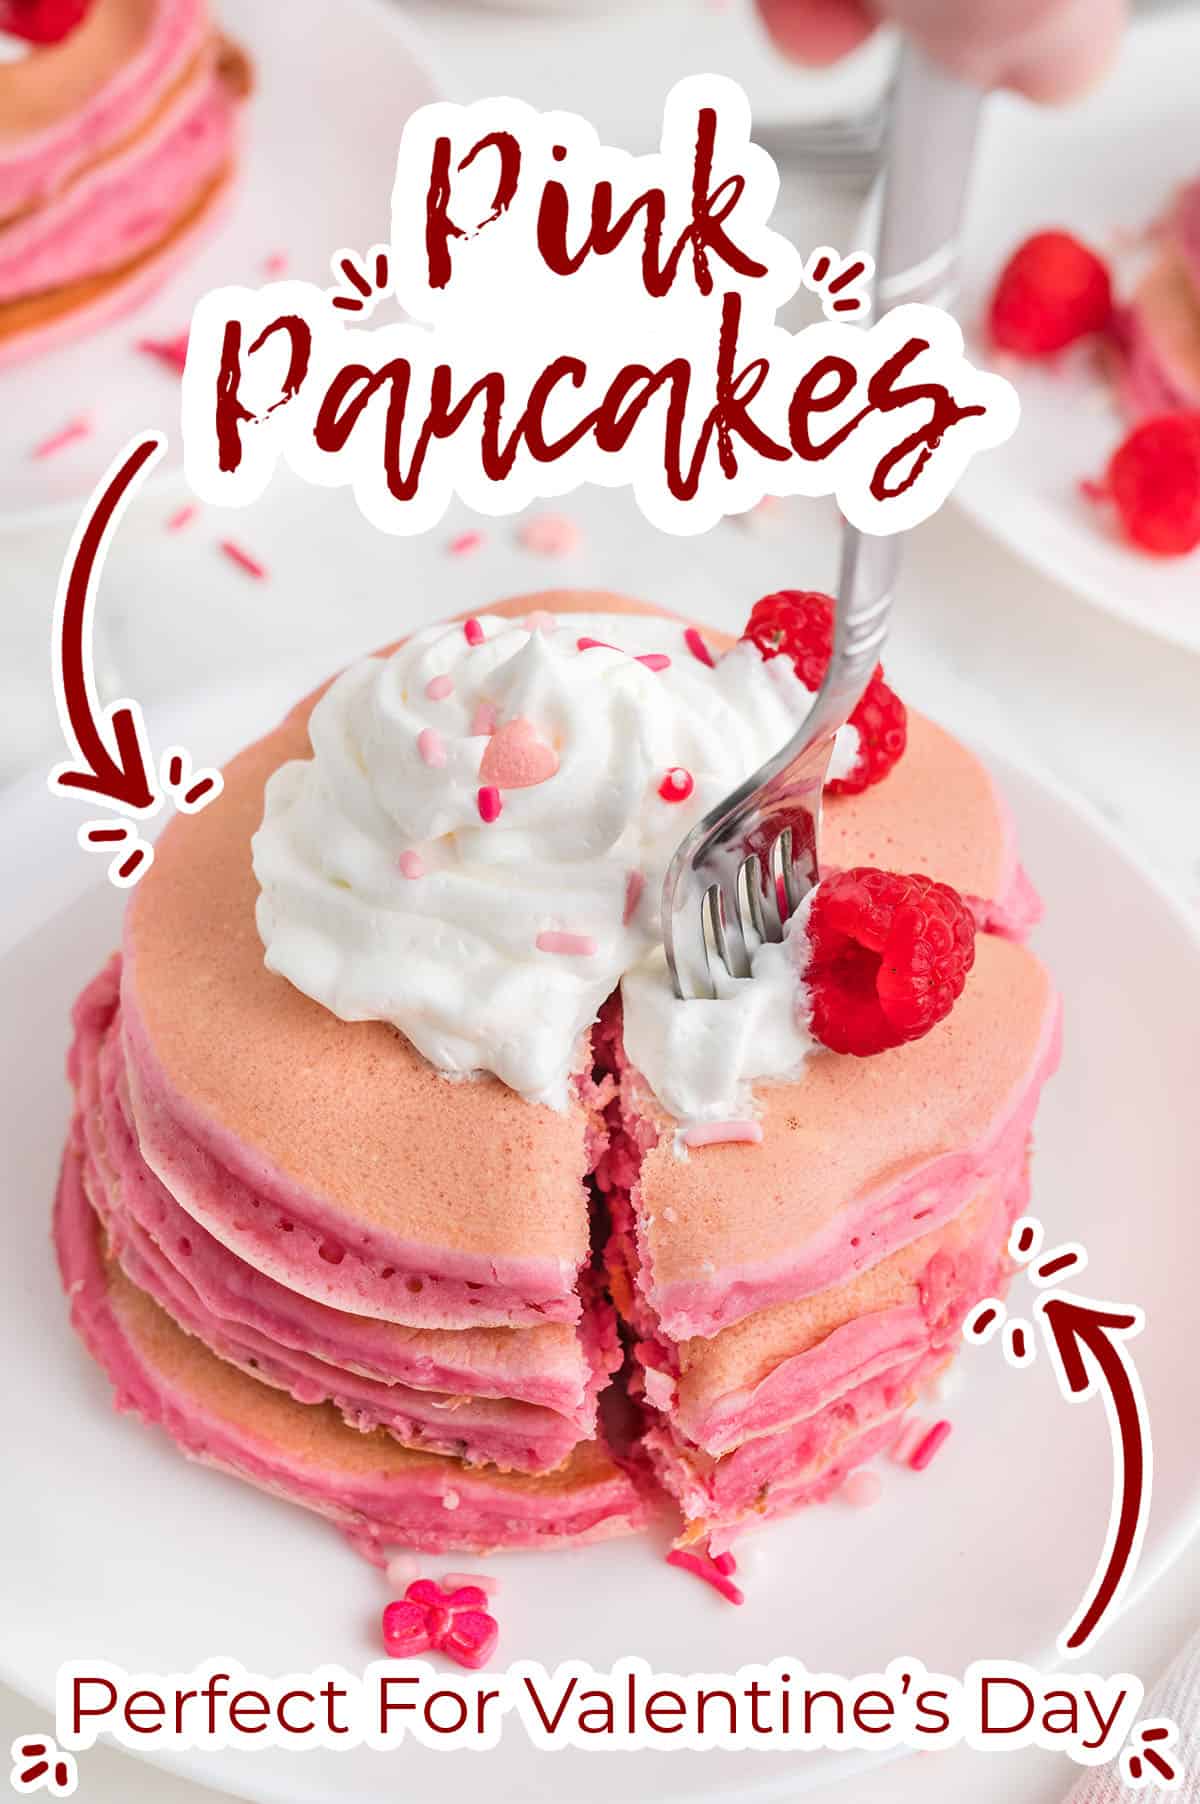 Text on image Pink Pancakes Perfect for Valentine's Day!